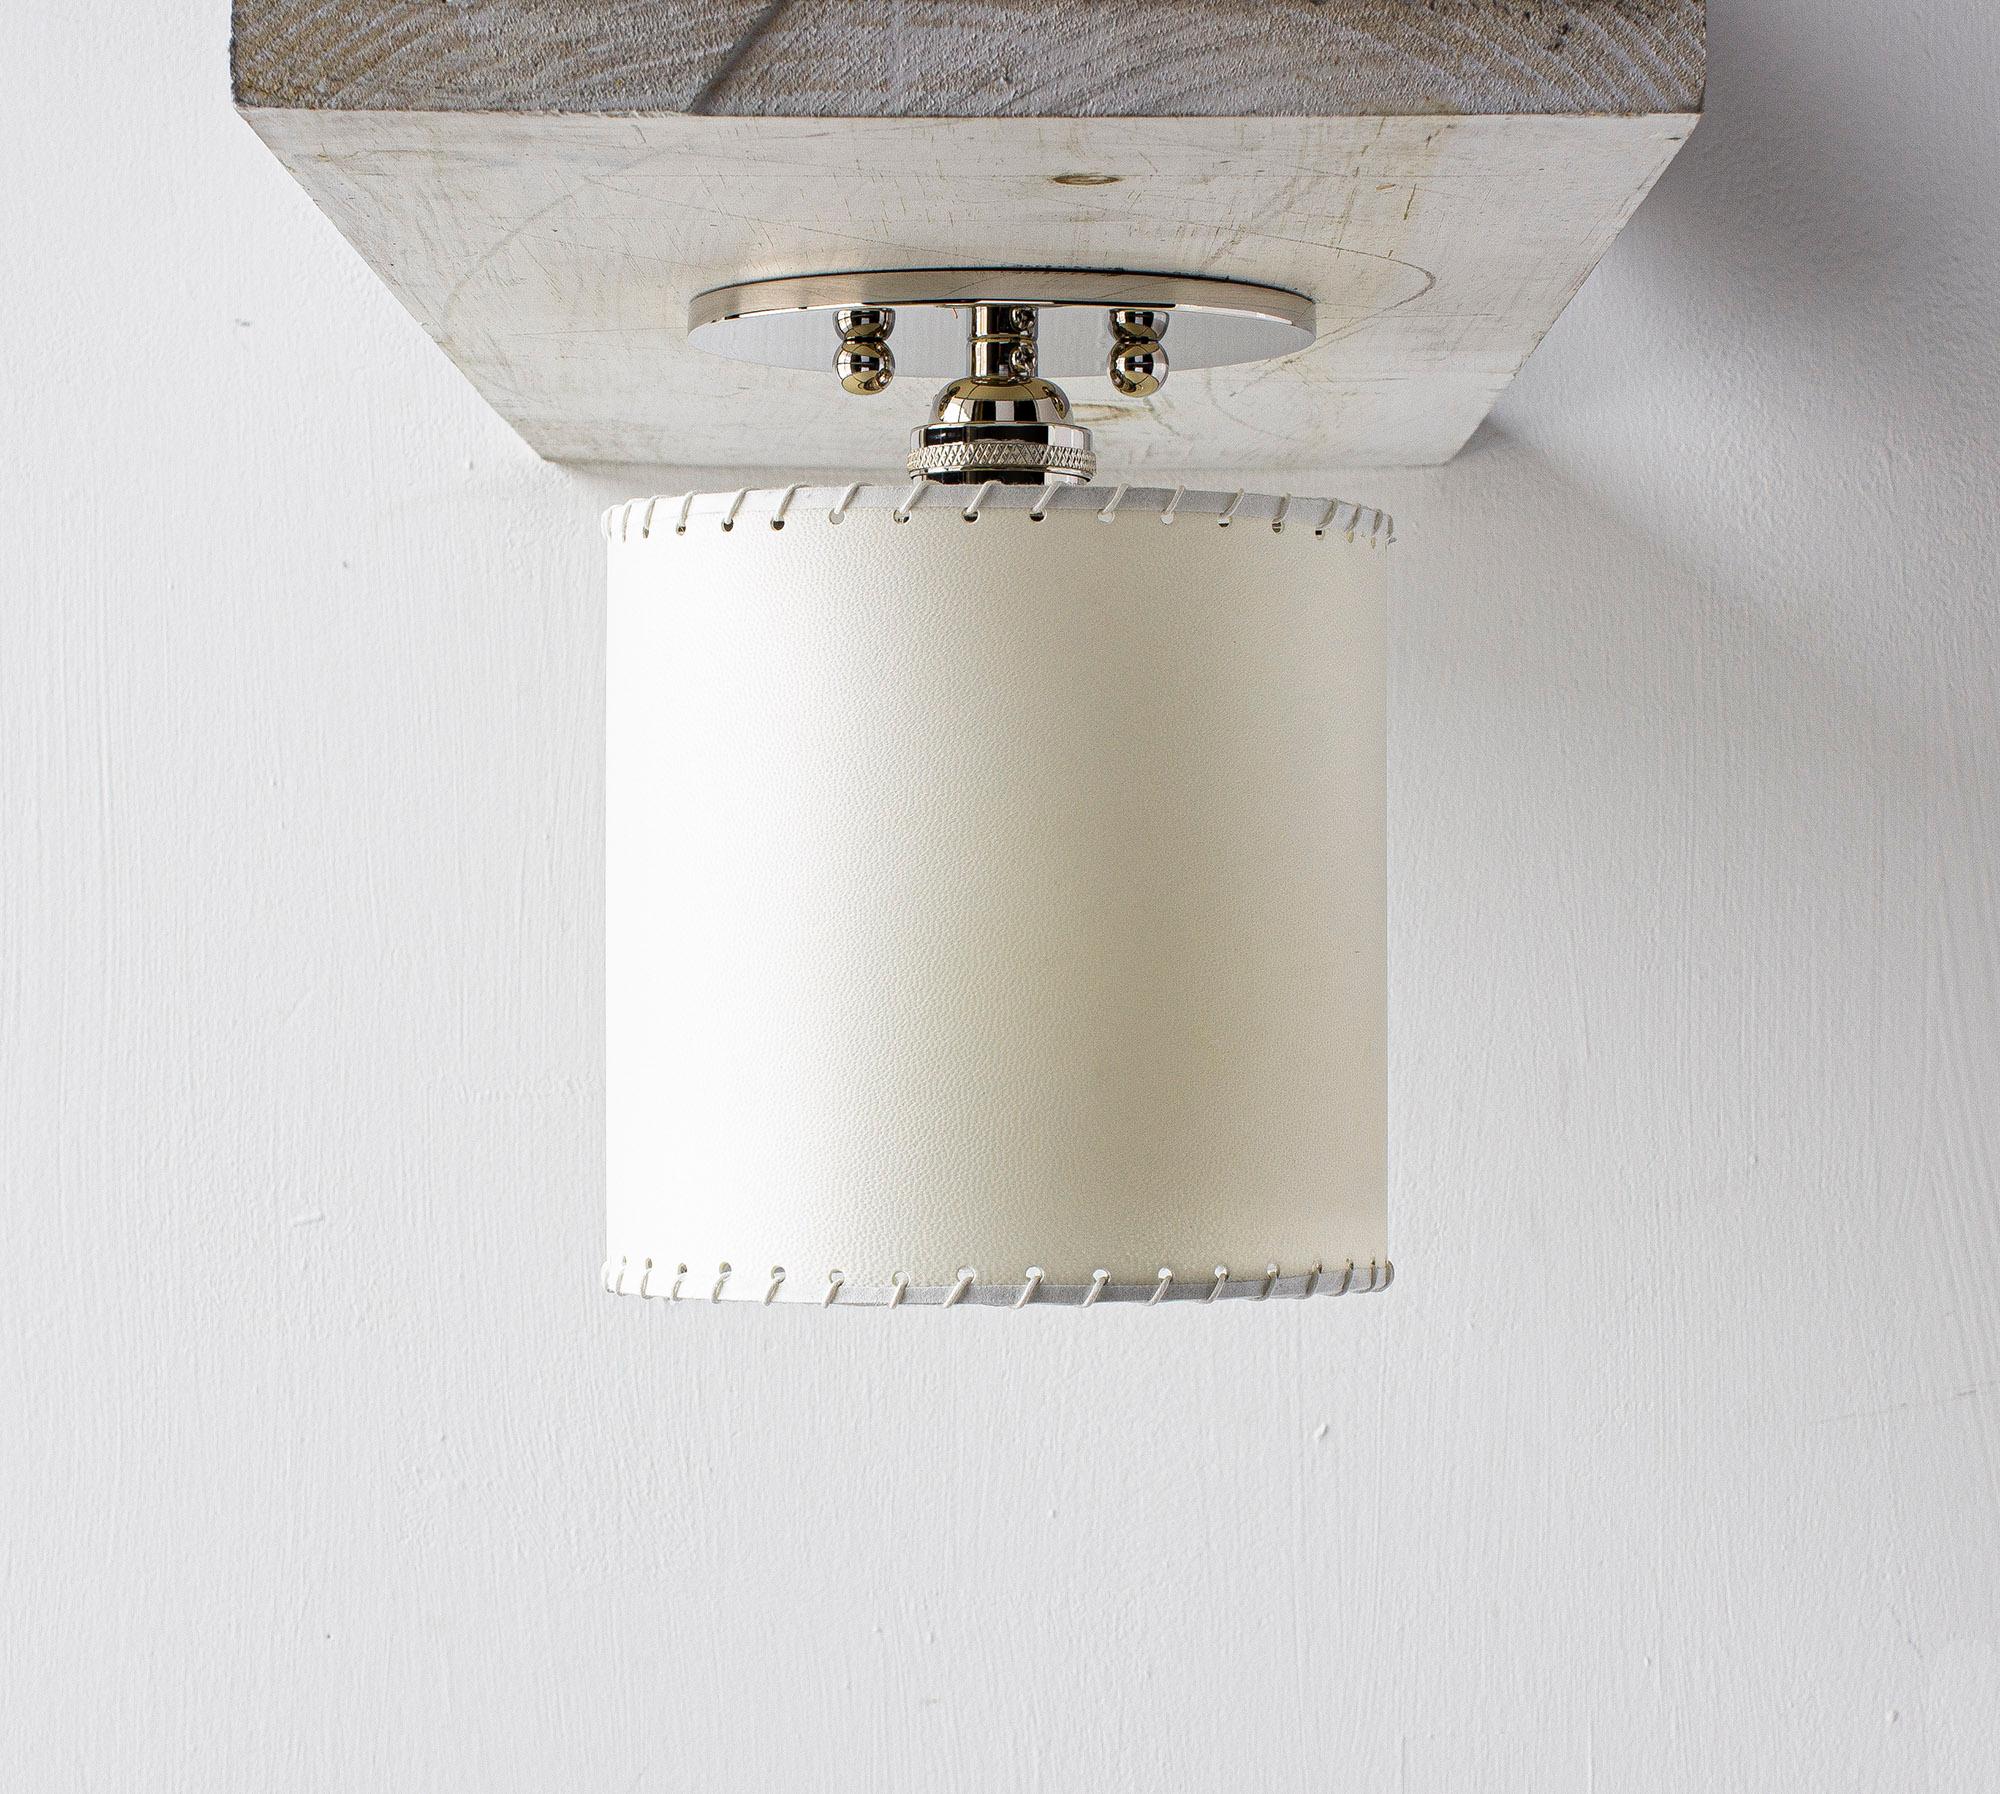 Solid machined brass, hand-stitched goatskin parchment shade with diffuser. 

Shades are made from genuine goatskin parchment, hand-selected for each lamp for its natural texture, pattern and color. Reminiscent of the lunar surface, its superior